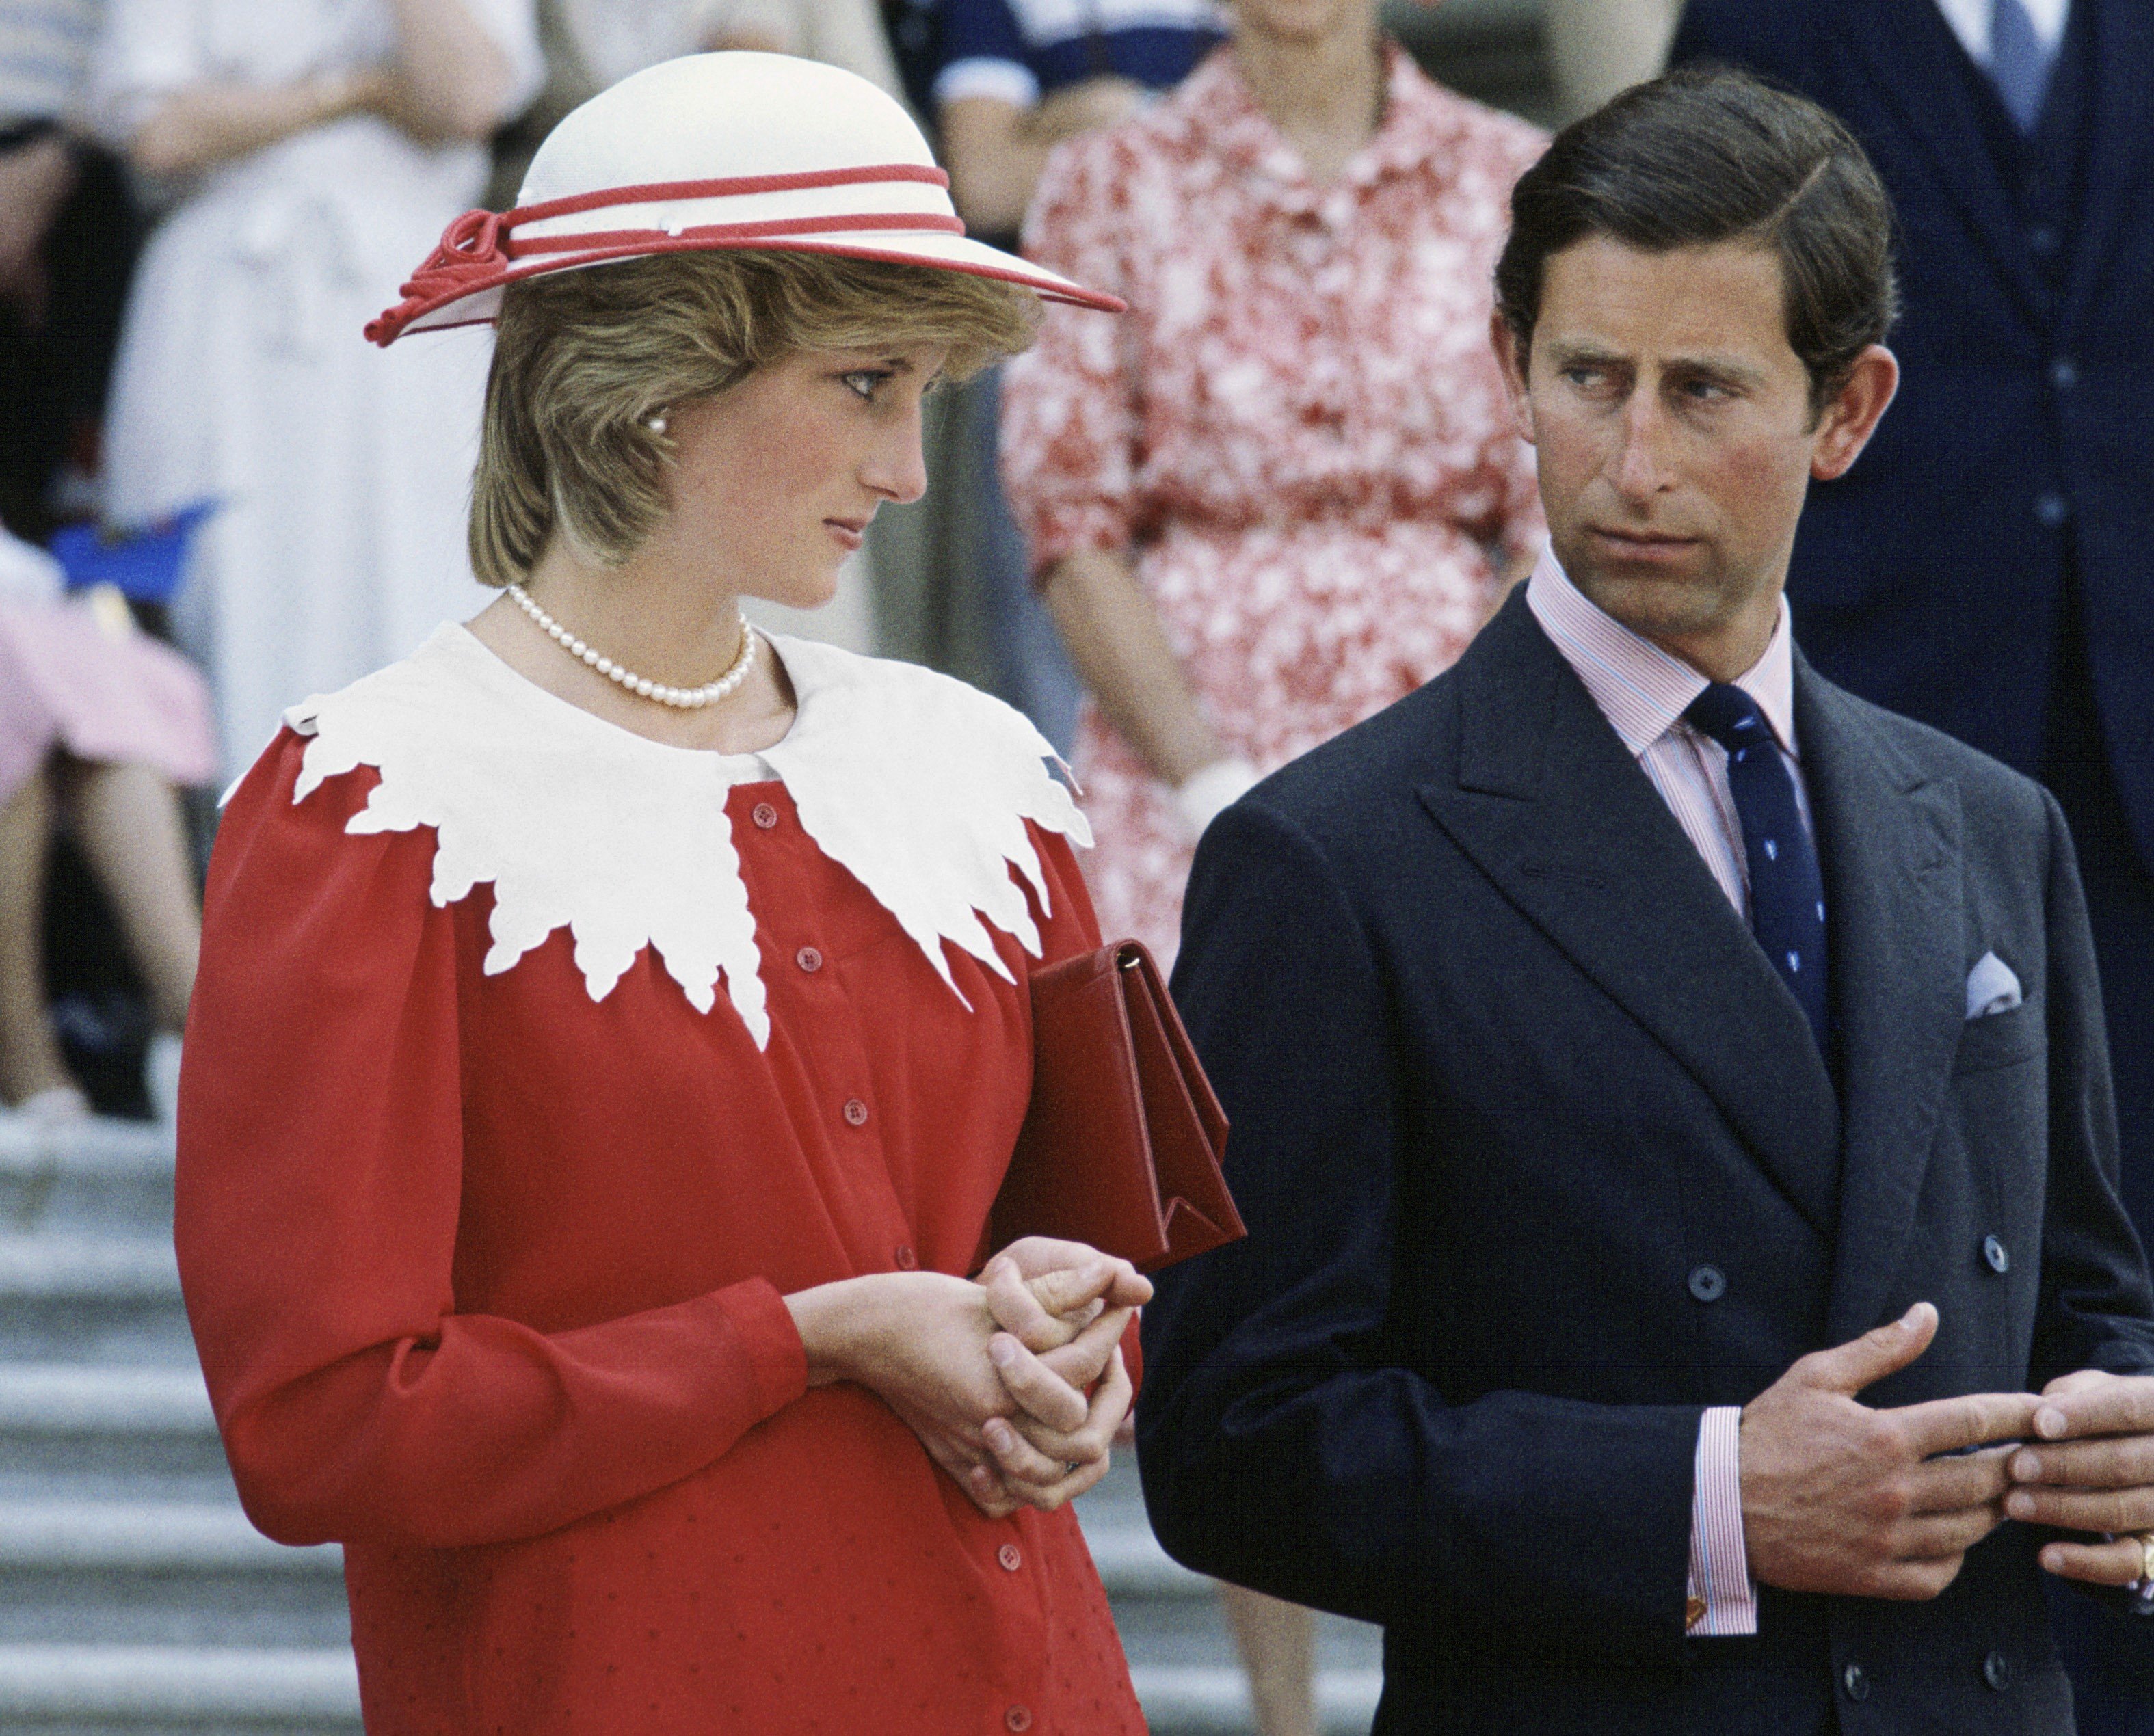 Princess Diana and Prince Charles looking unhappy at an event in Canada